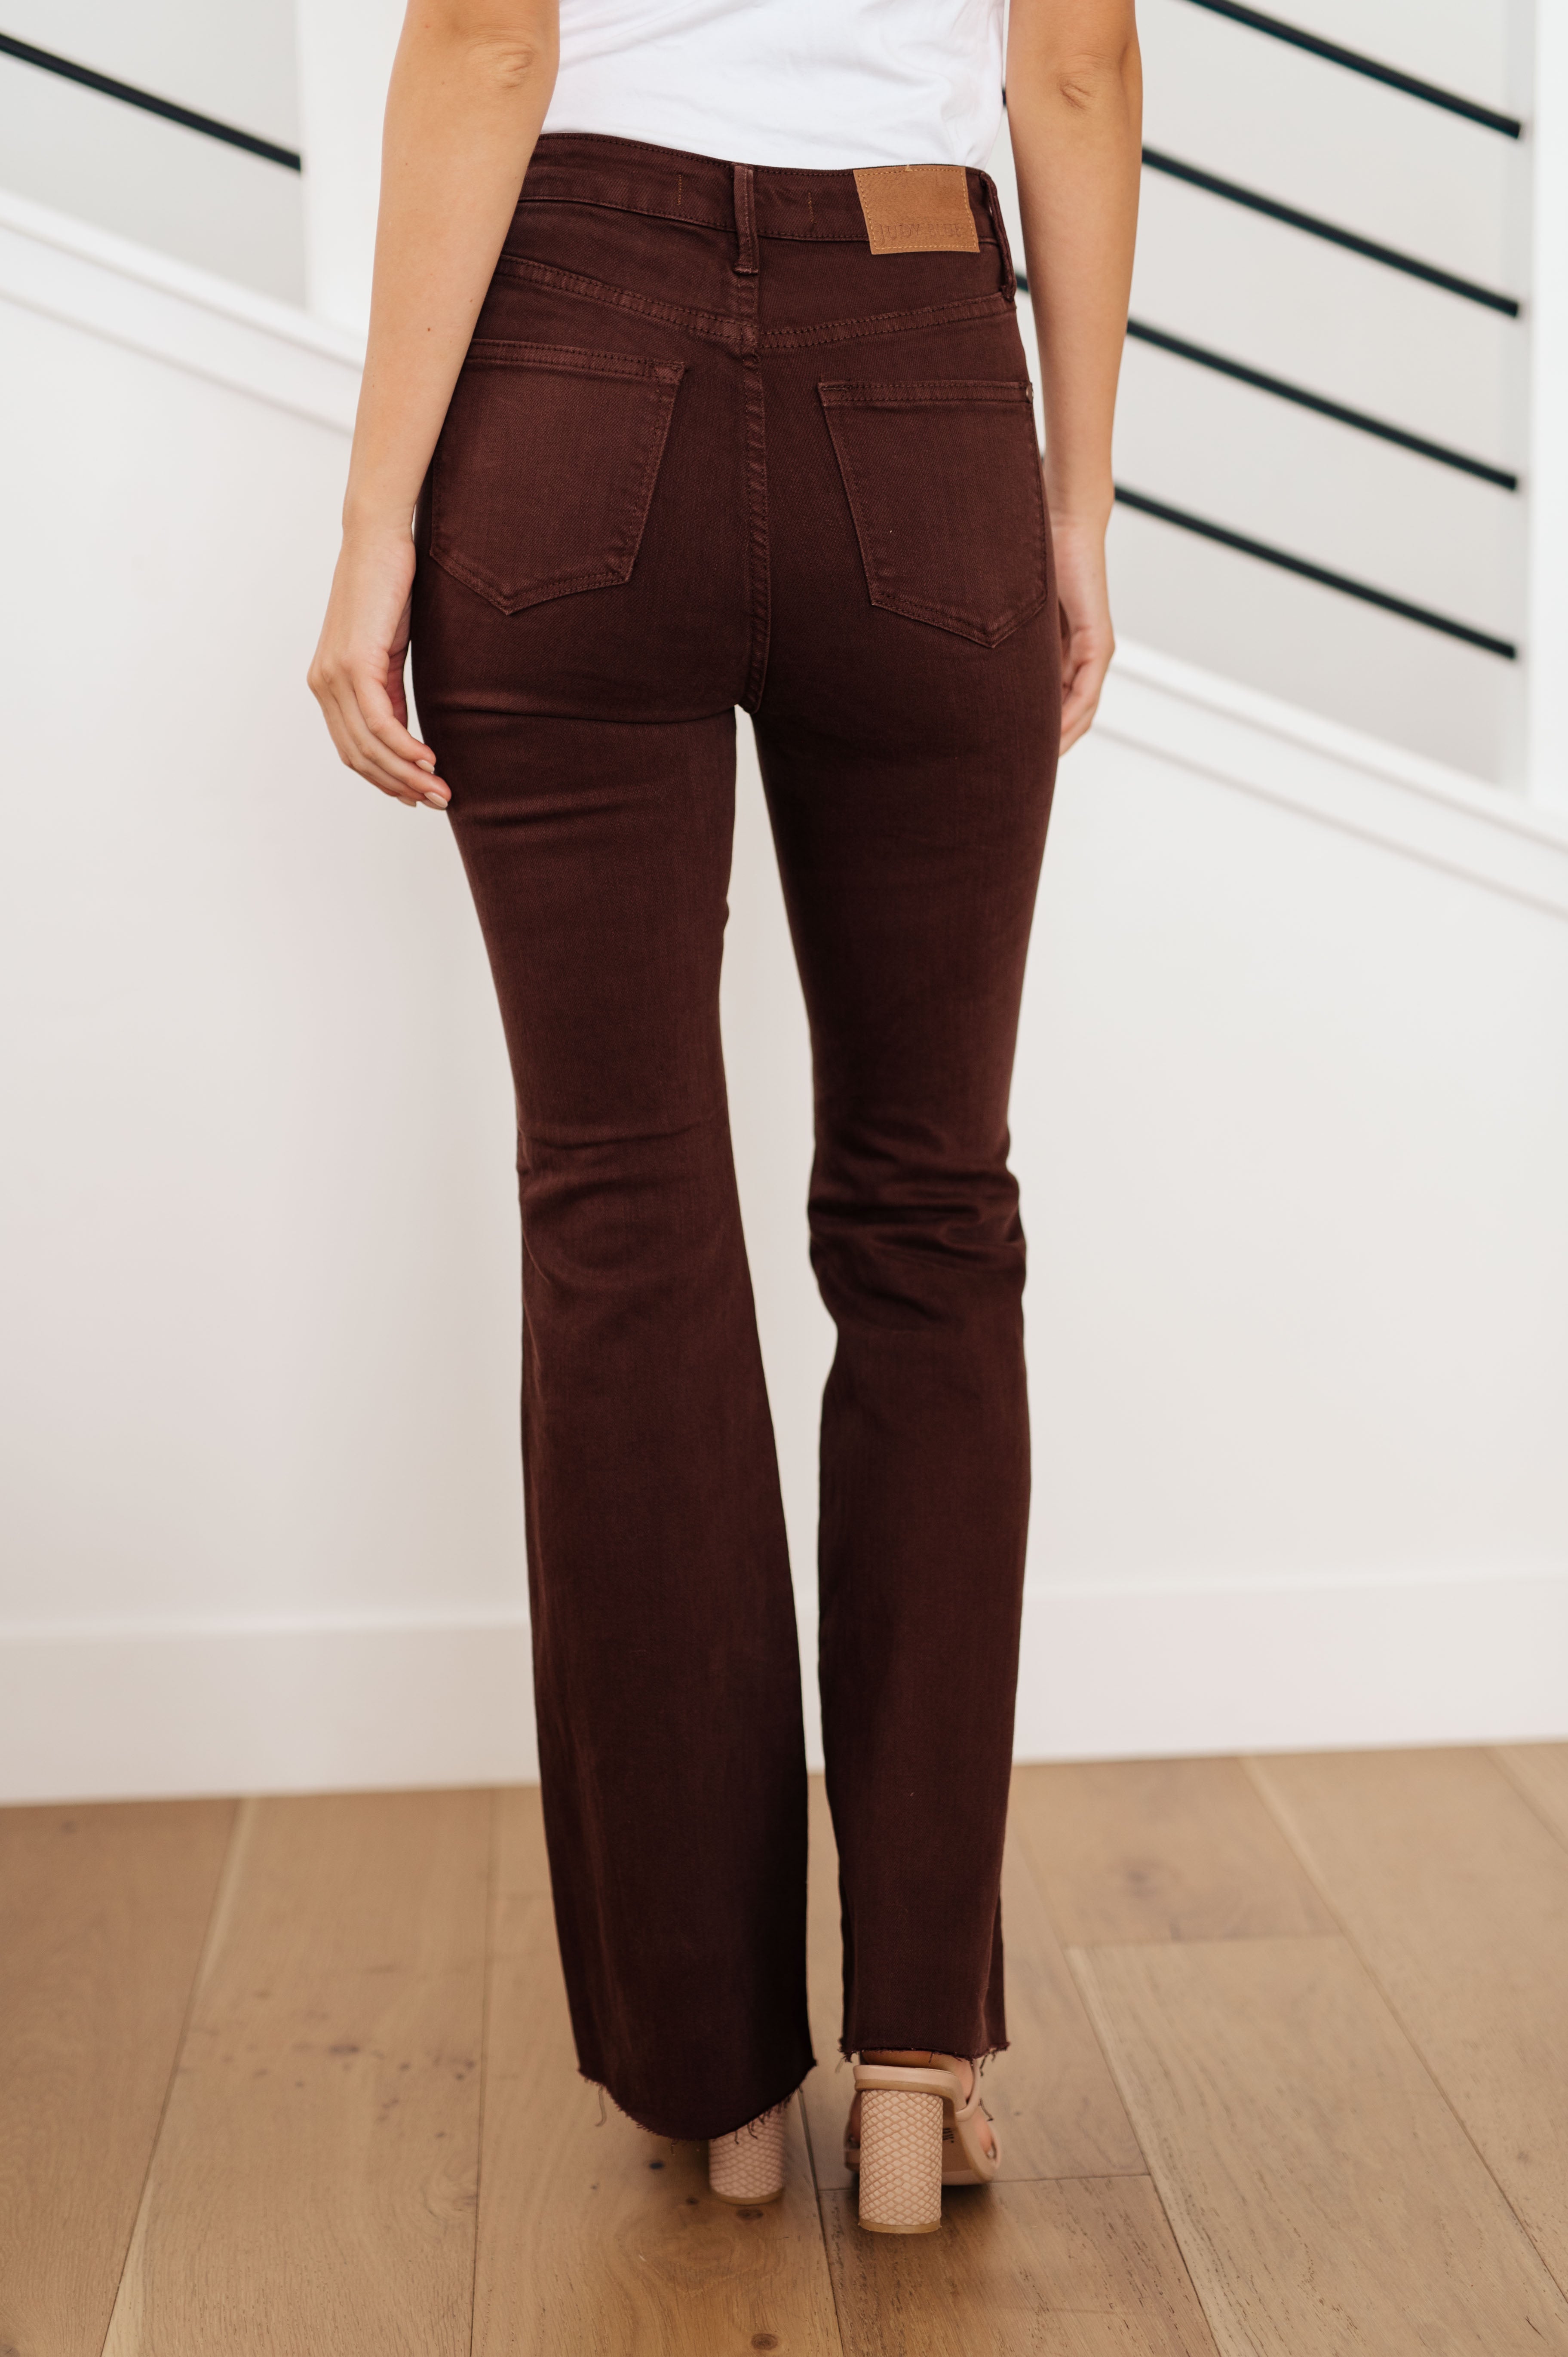 Judy Blue Sienna High Rise Control Top Flare Jeans in Espresso - Lola Cerina Boutique